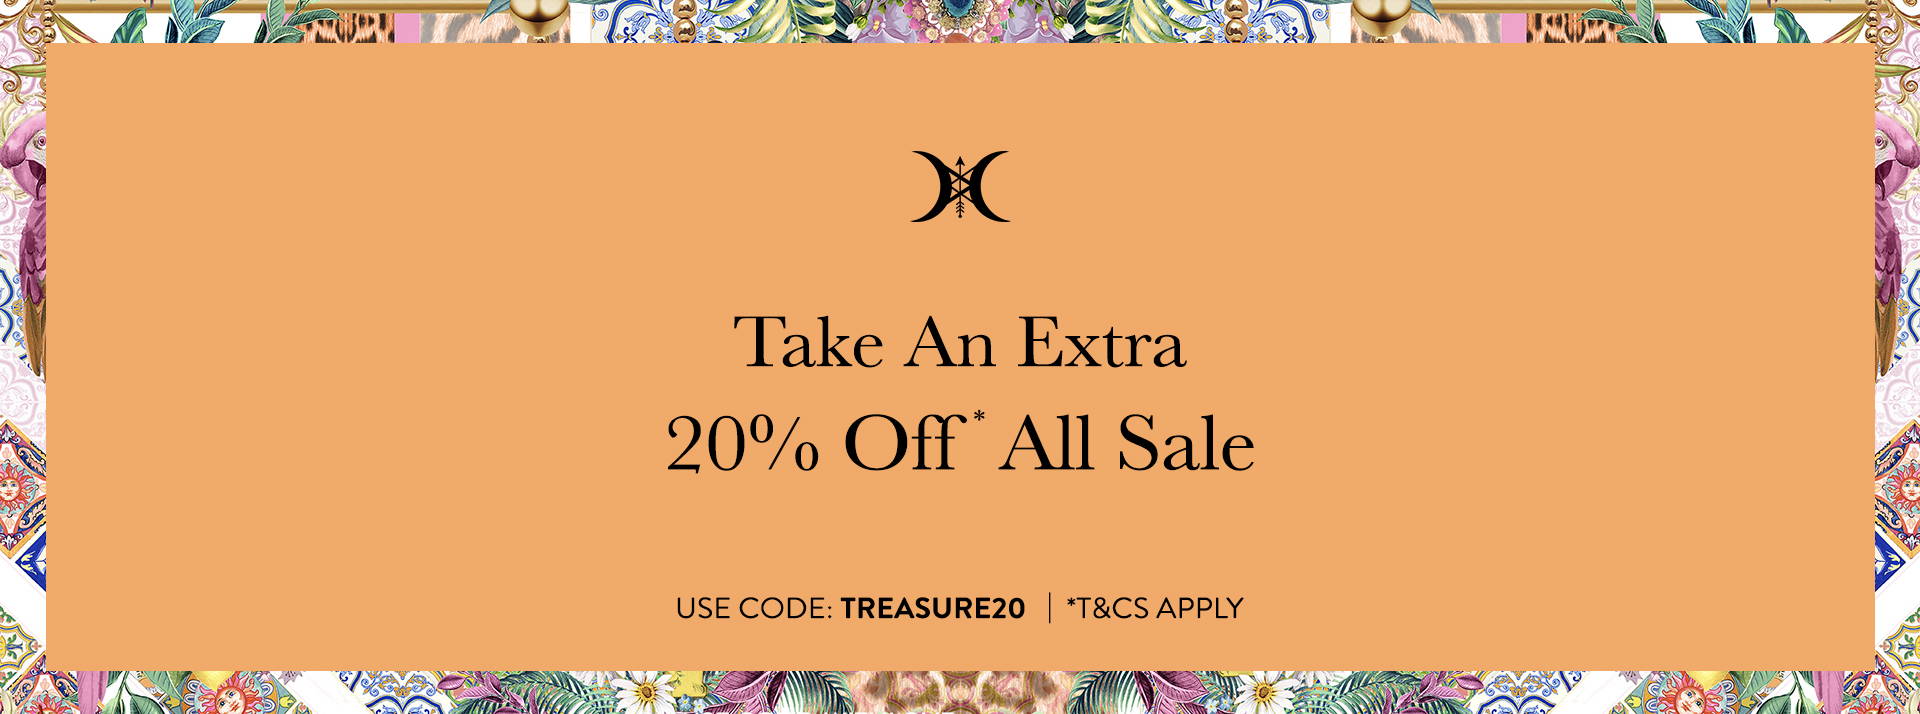 TAKE AN EXTRA 20% OFF* ALL SALE